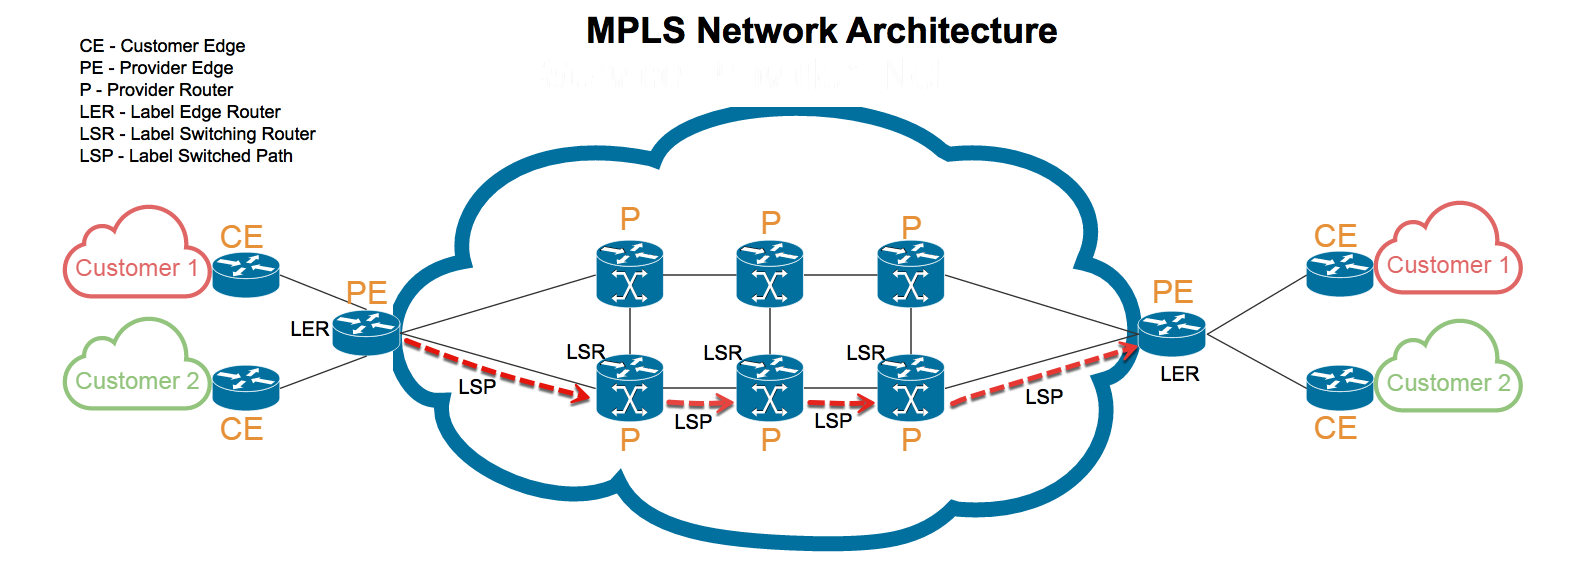 MPLS Network Architecture